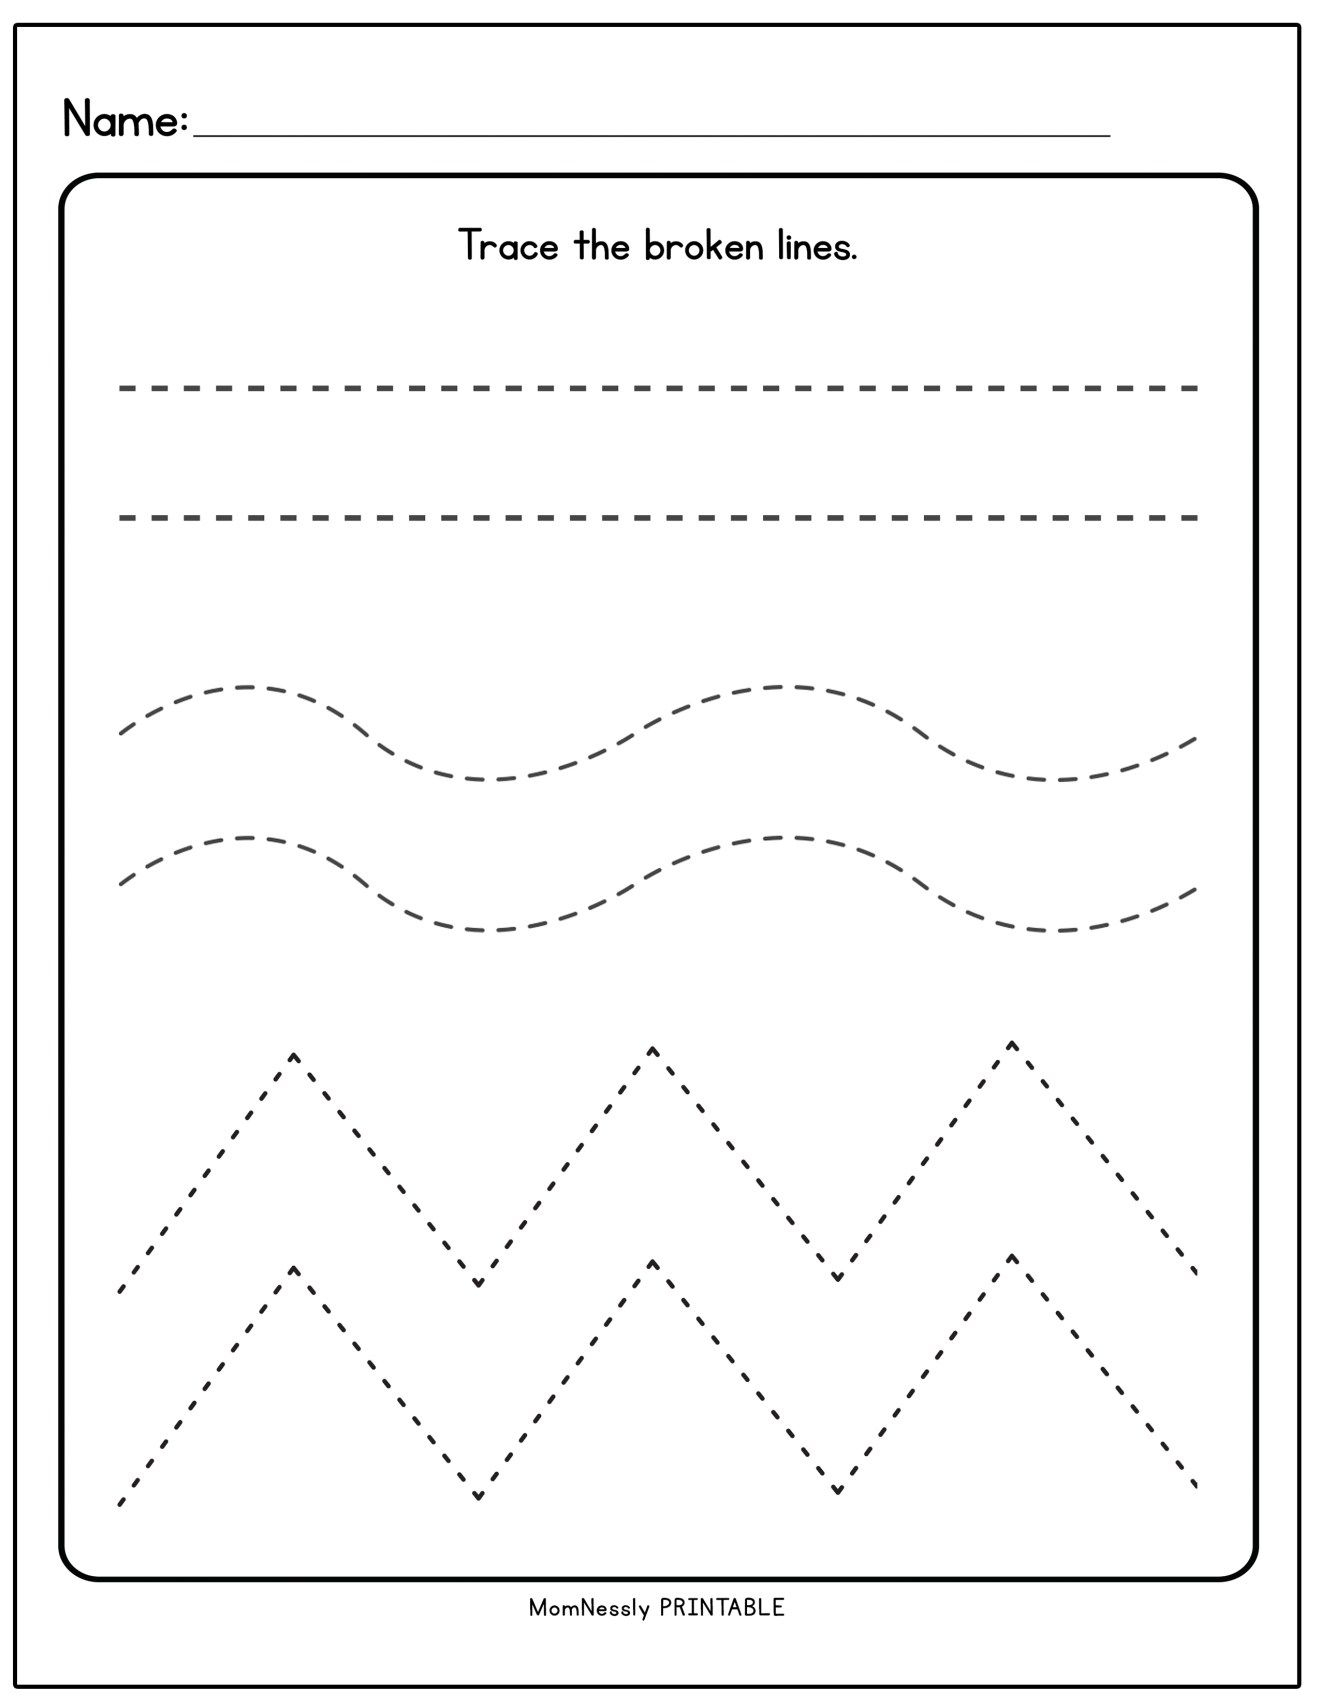 Worksheet On Tracing For Preschoolers : Tracing Pages for Preschool